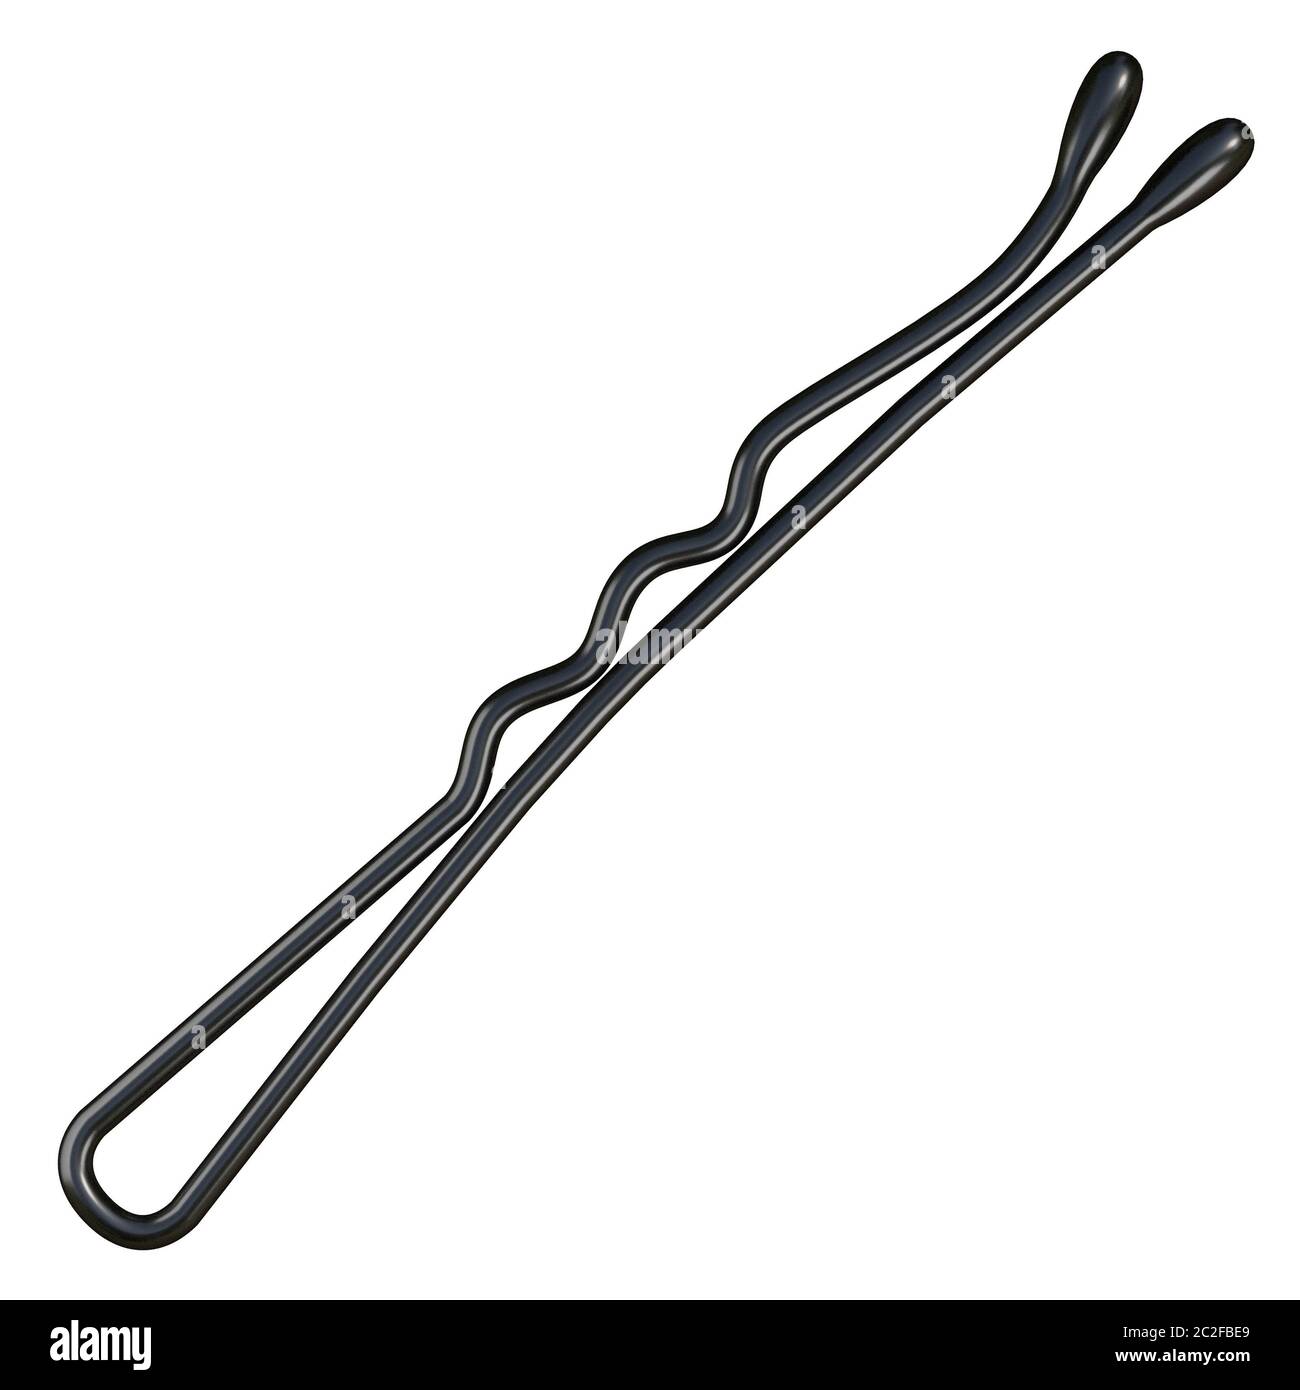 Black Metal Hairpin 3d Rendering Illustration Isolated On White